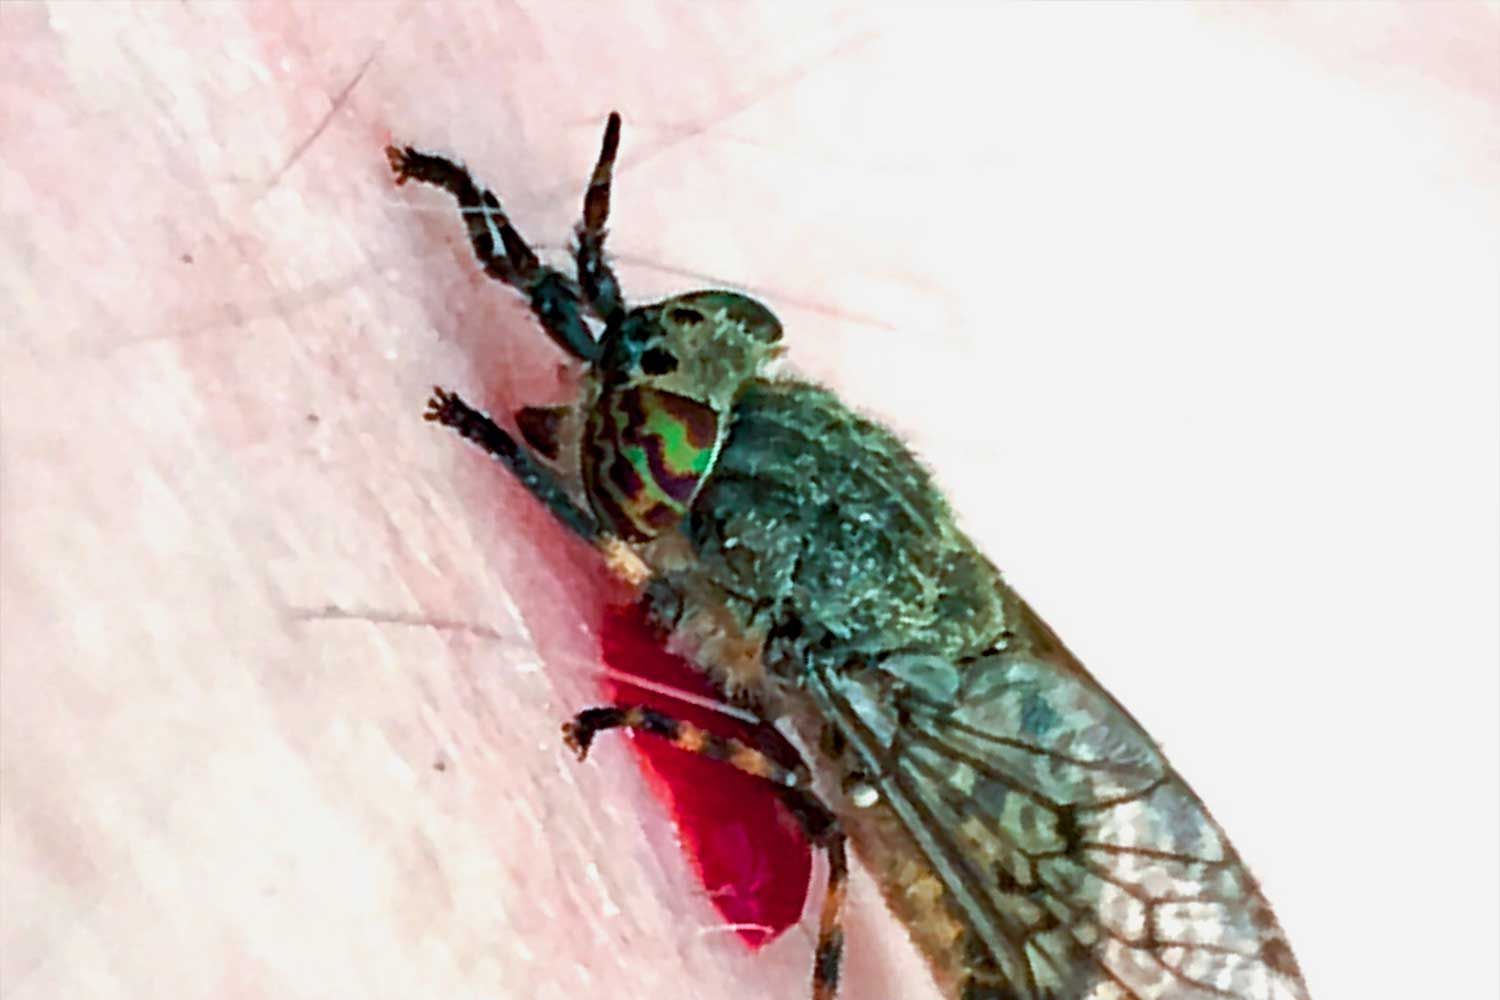 horse fly feeding on fresh blood from bite on human host